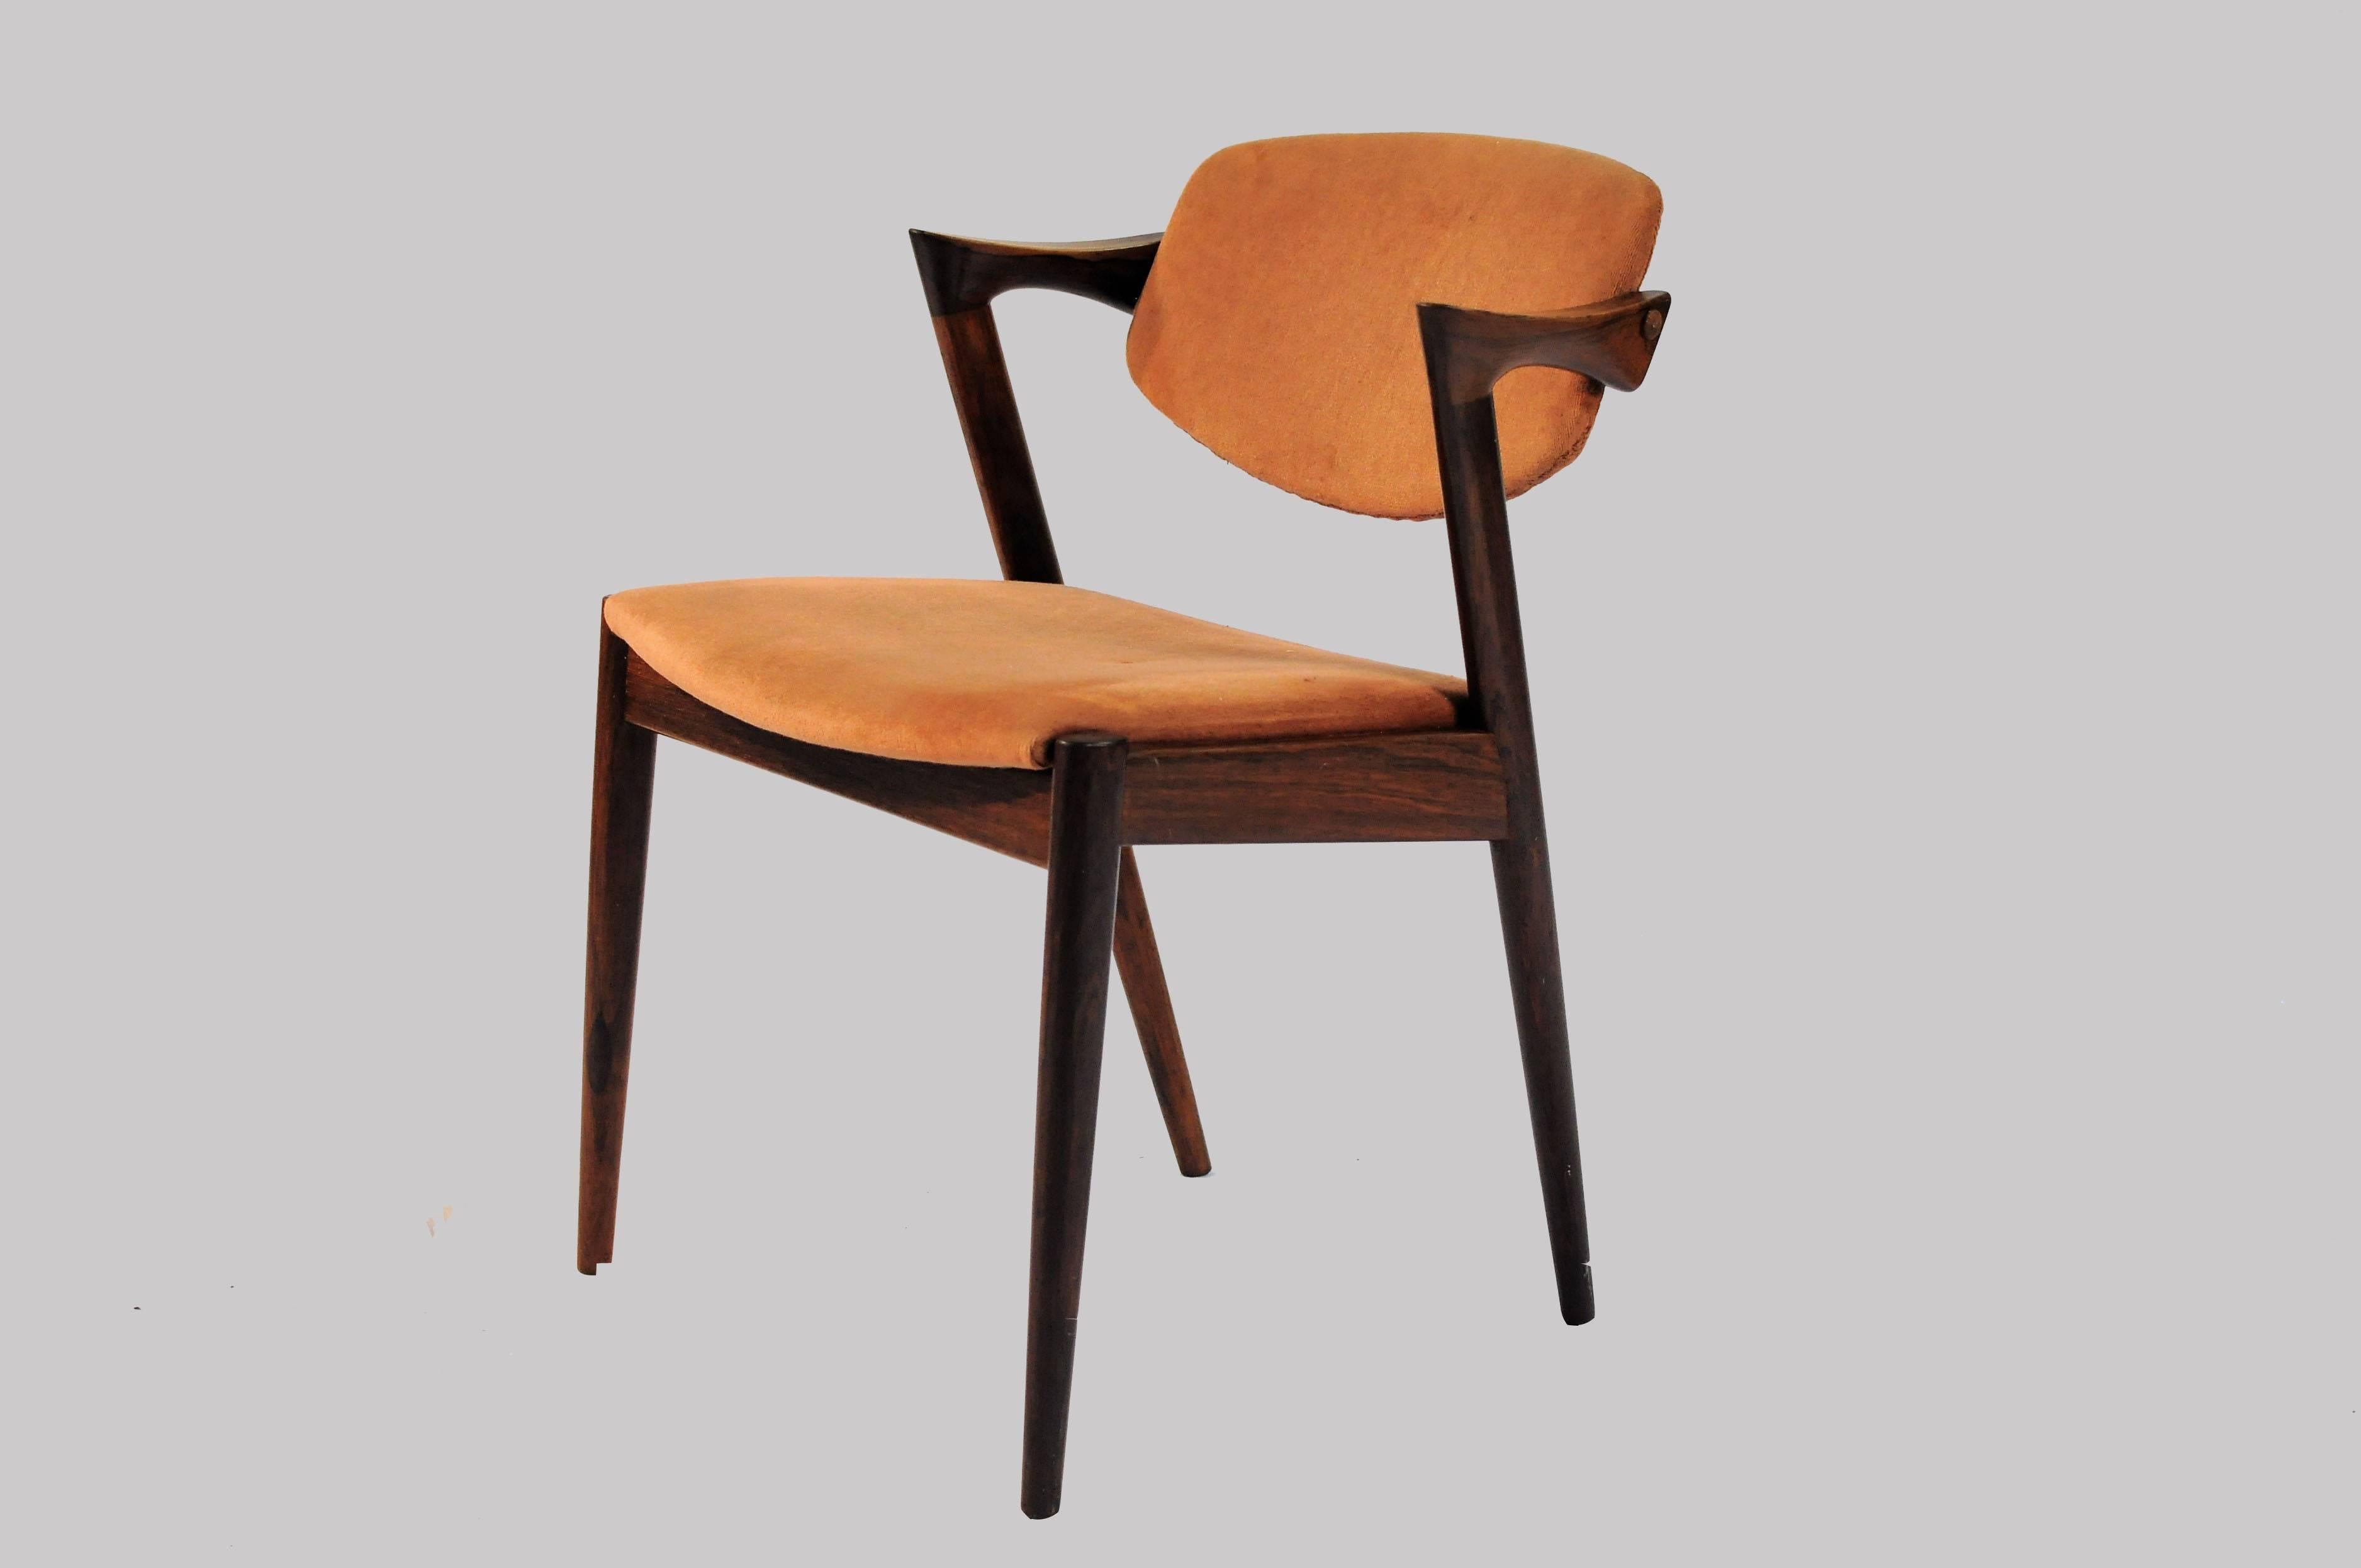 Set of 8 1960s rosewood dining chairs with adjustable backrest by Kai Kristiansen for Schous Møbelfabrik.

The chairs have Kai Kristiansens typical light and elegant design that make them fit in easily where you want them in your home - a design